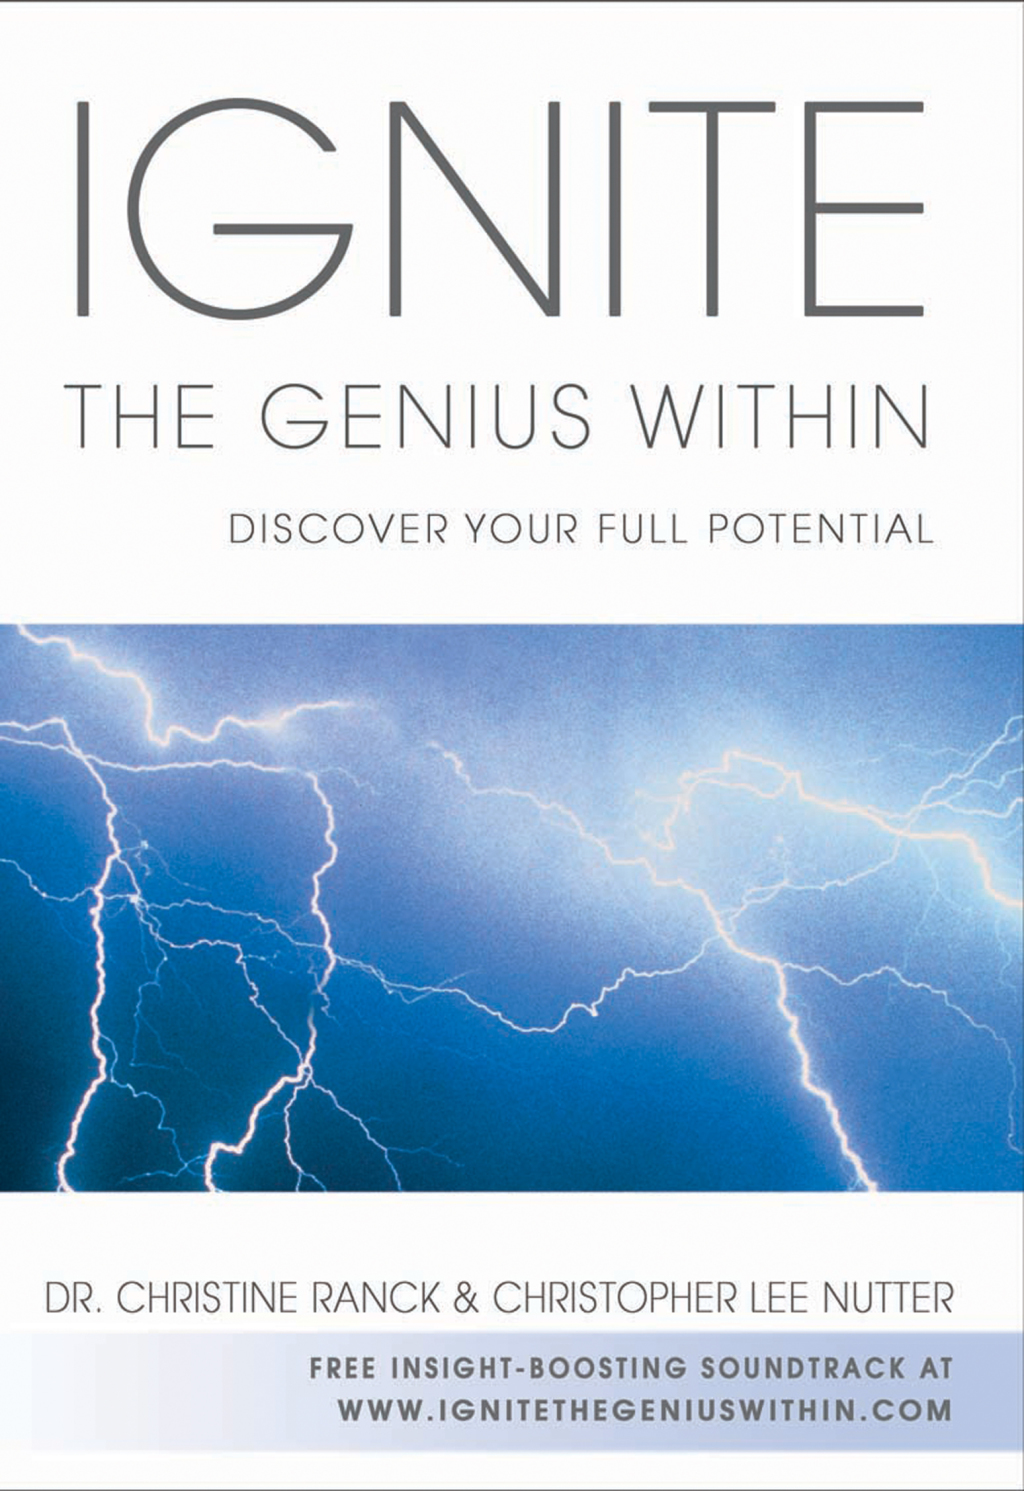 Ignite the Genius Within (eBook) - Christine Ranck; Christopher Lee Nutter,